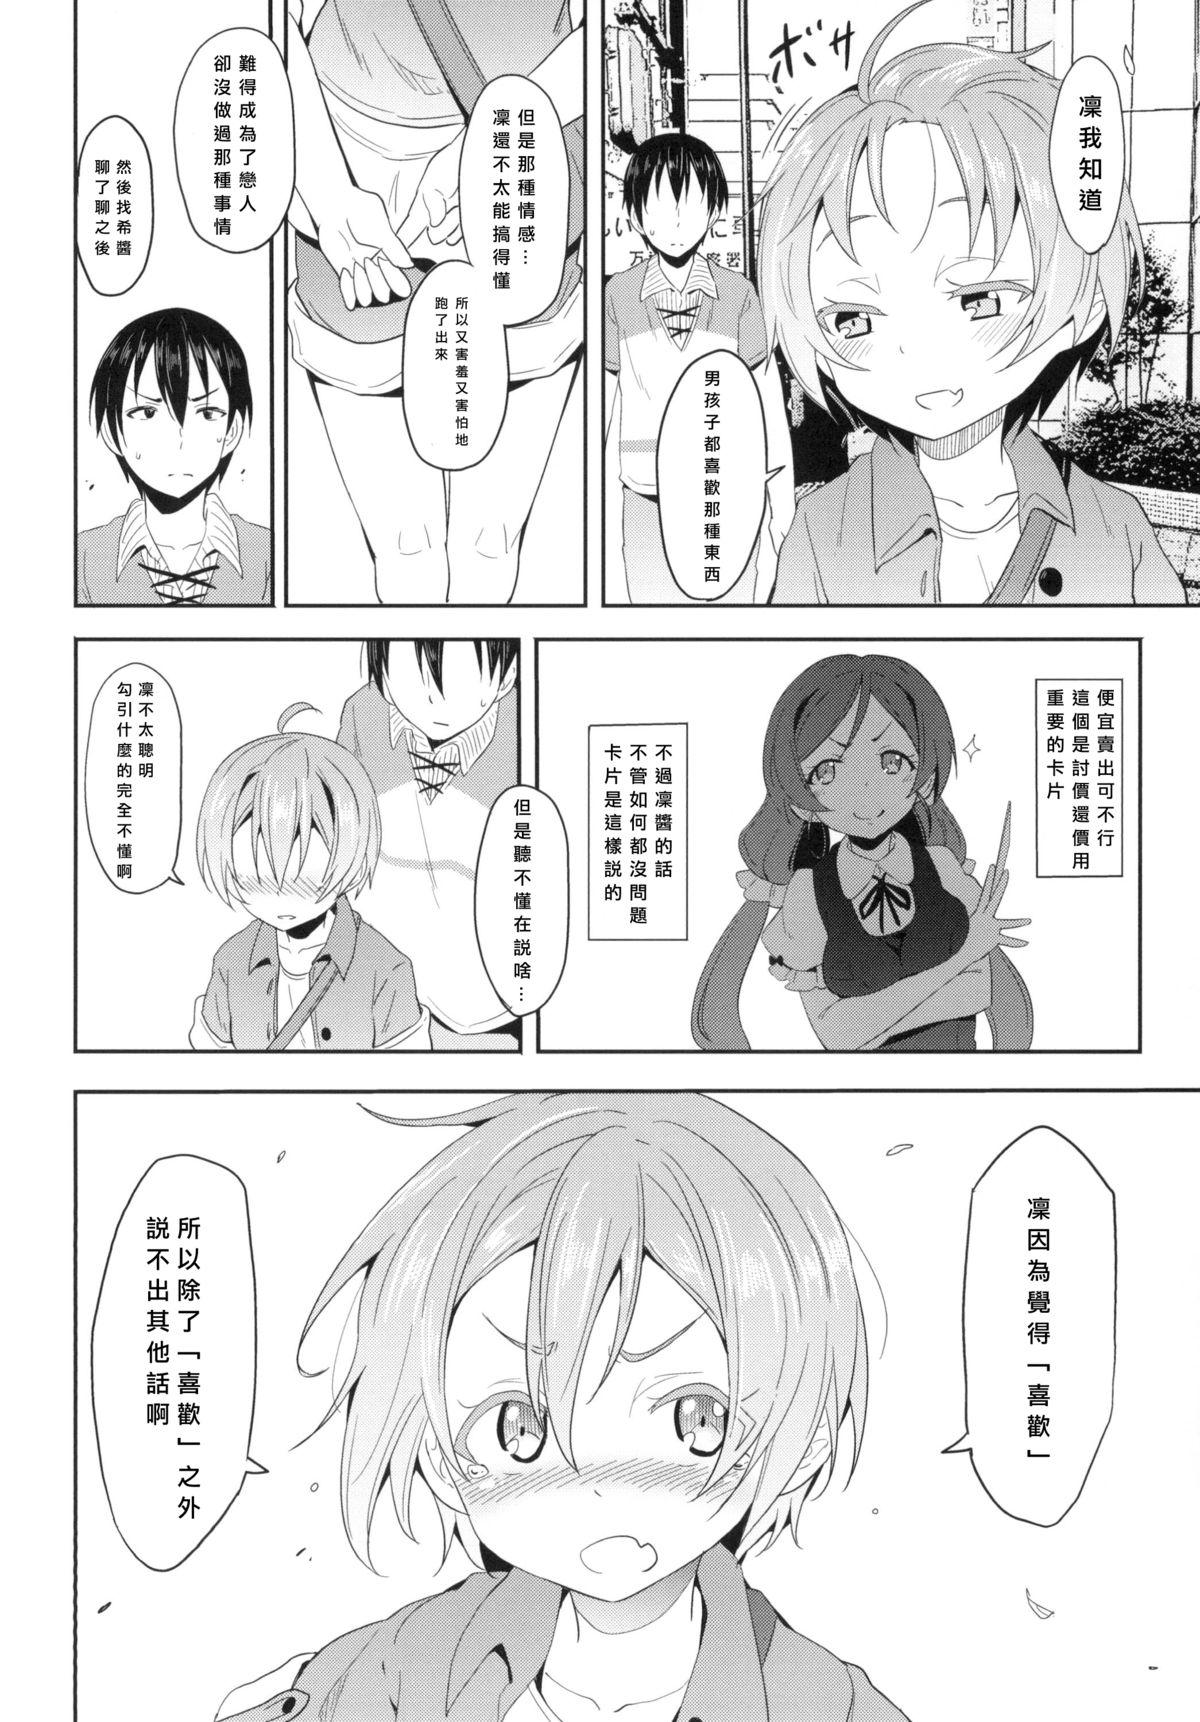 Softcore Rin-chan to Issho. - Love live High Heels - Page 6